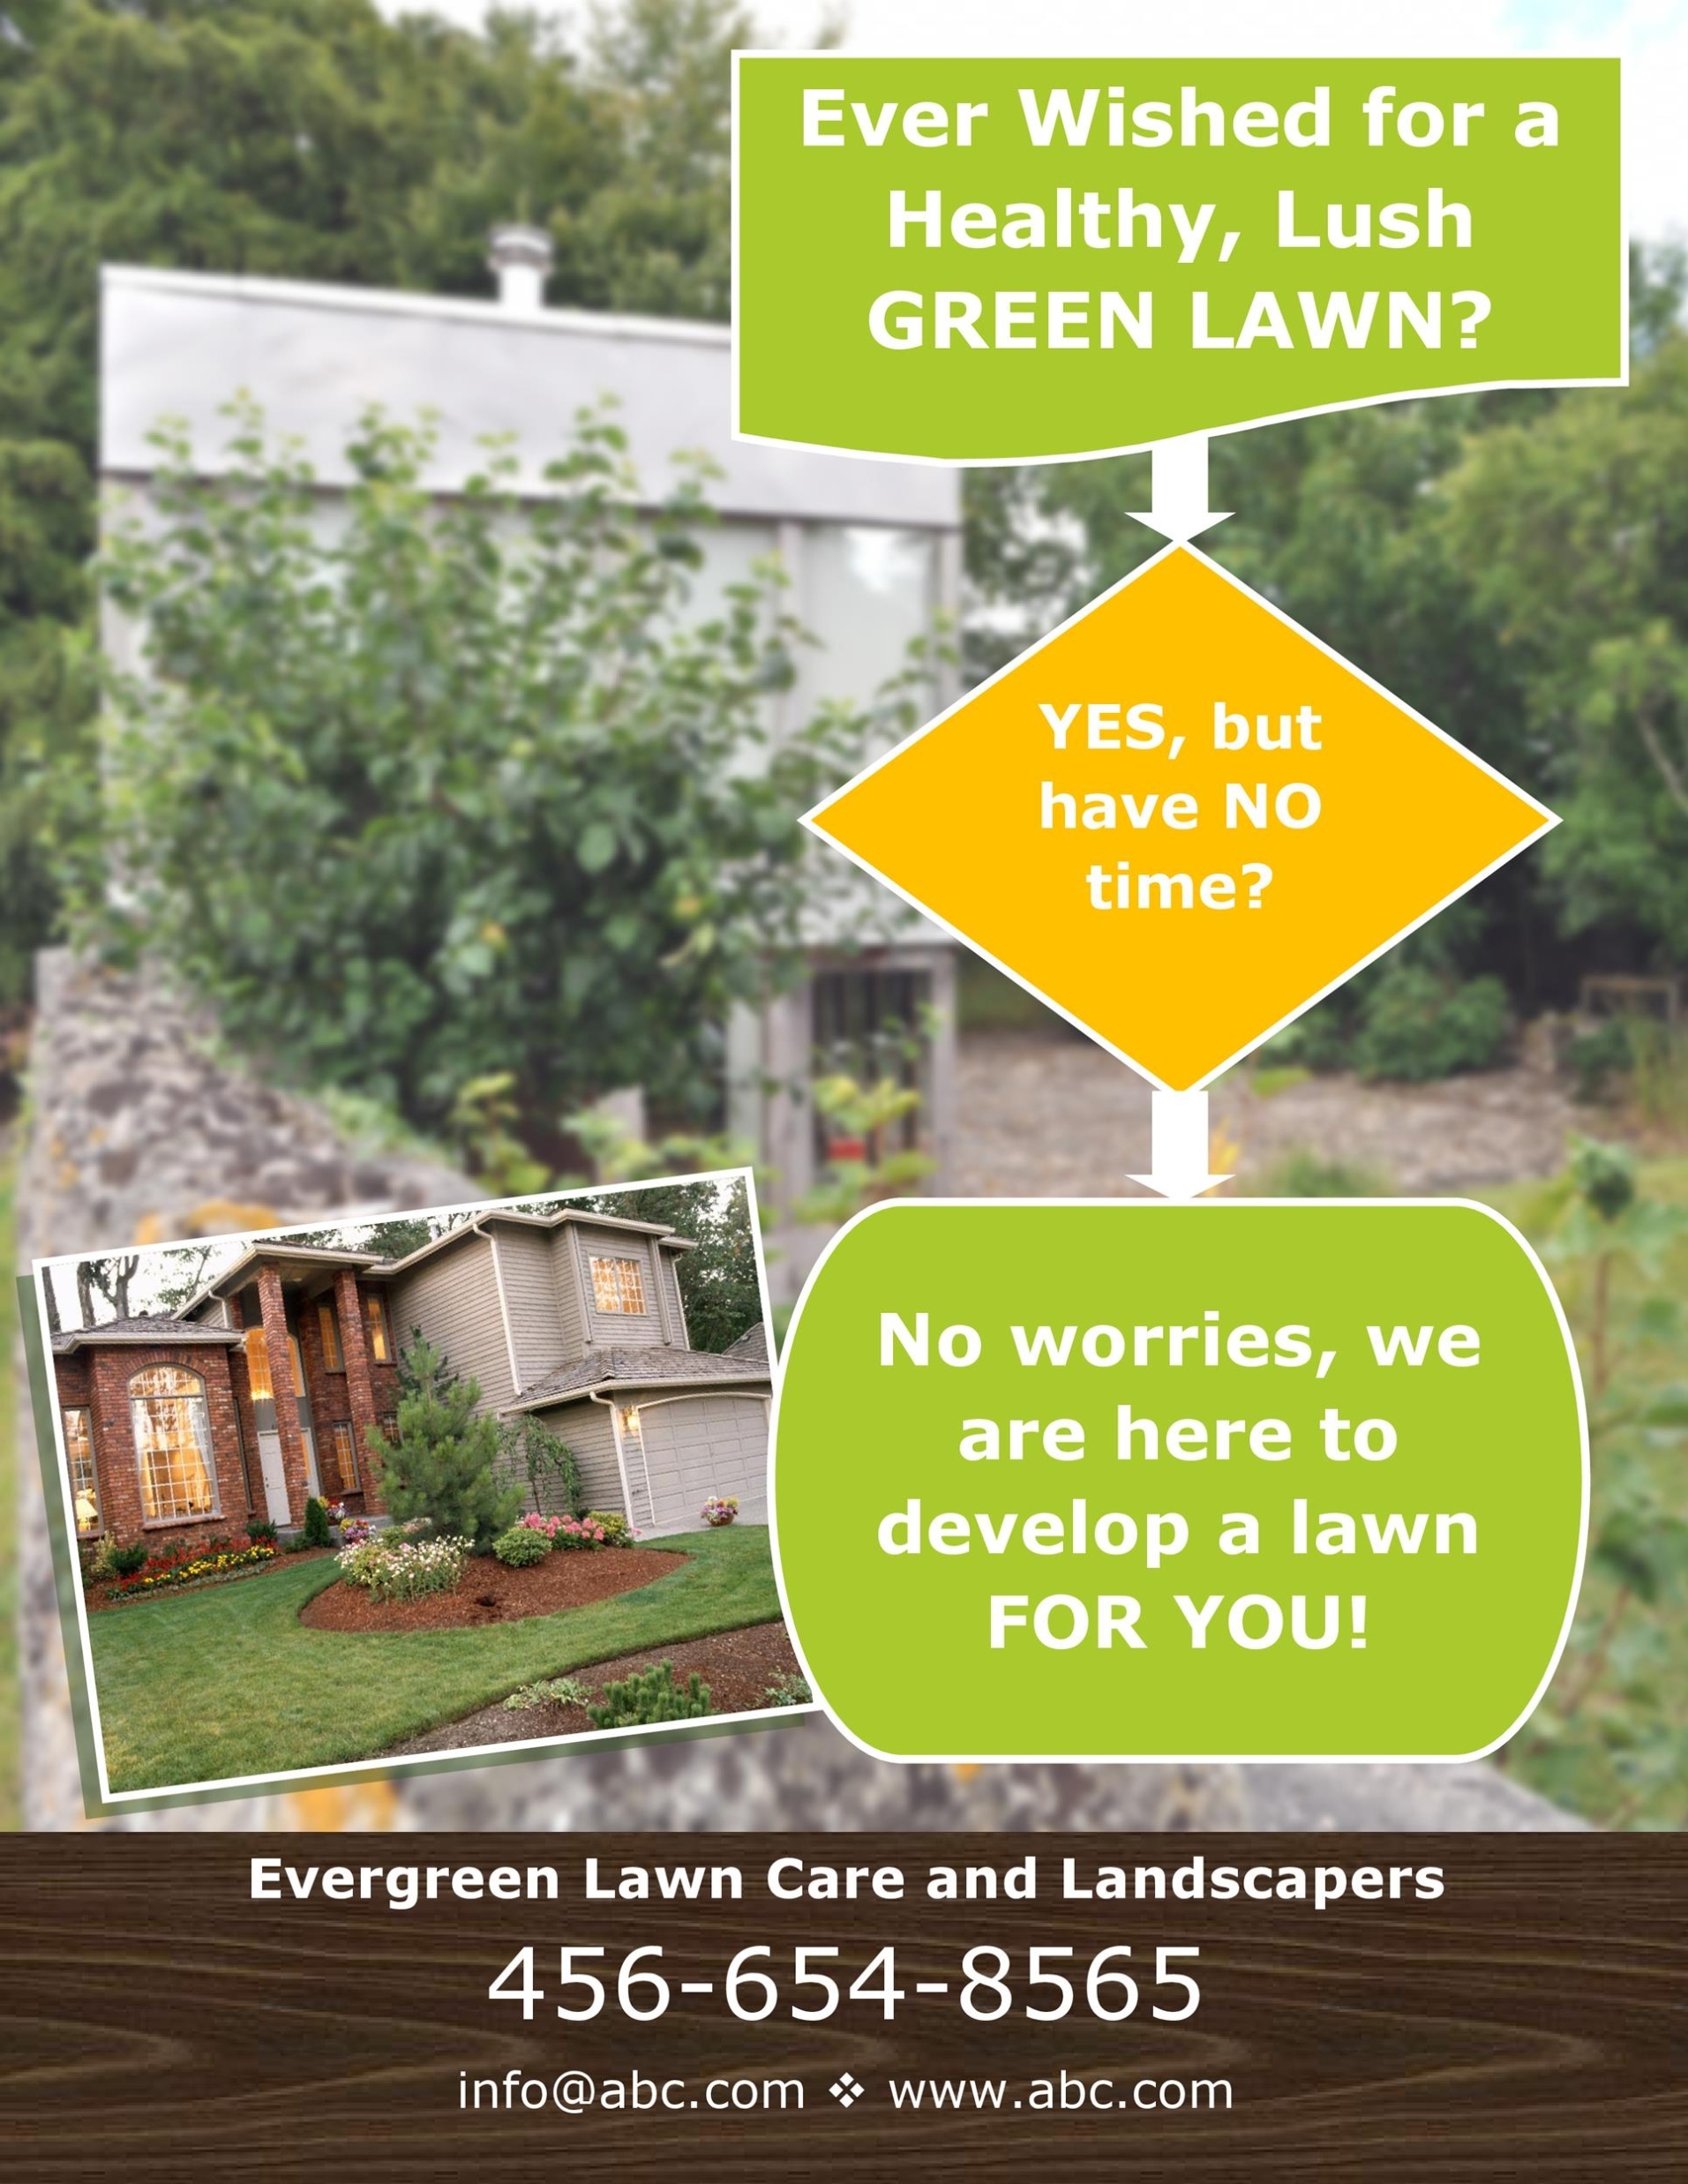 30 Free Lawn Care Flyer Templates [Lawn Mower Flyers] ᐅ Templatelab Pertaining To Landscaping Flyer Templates